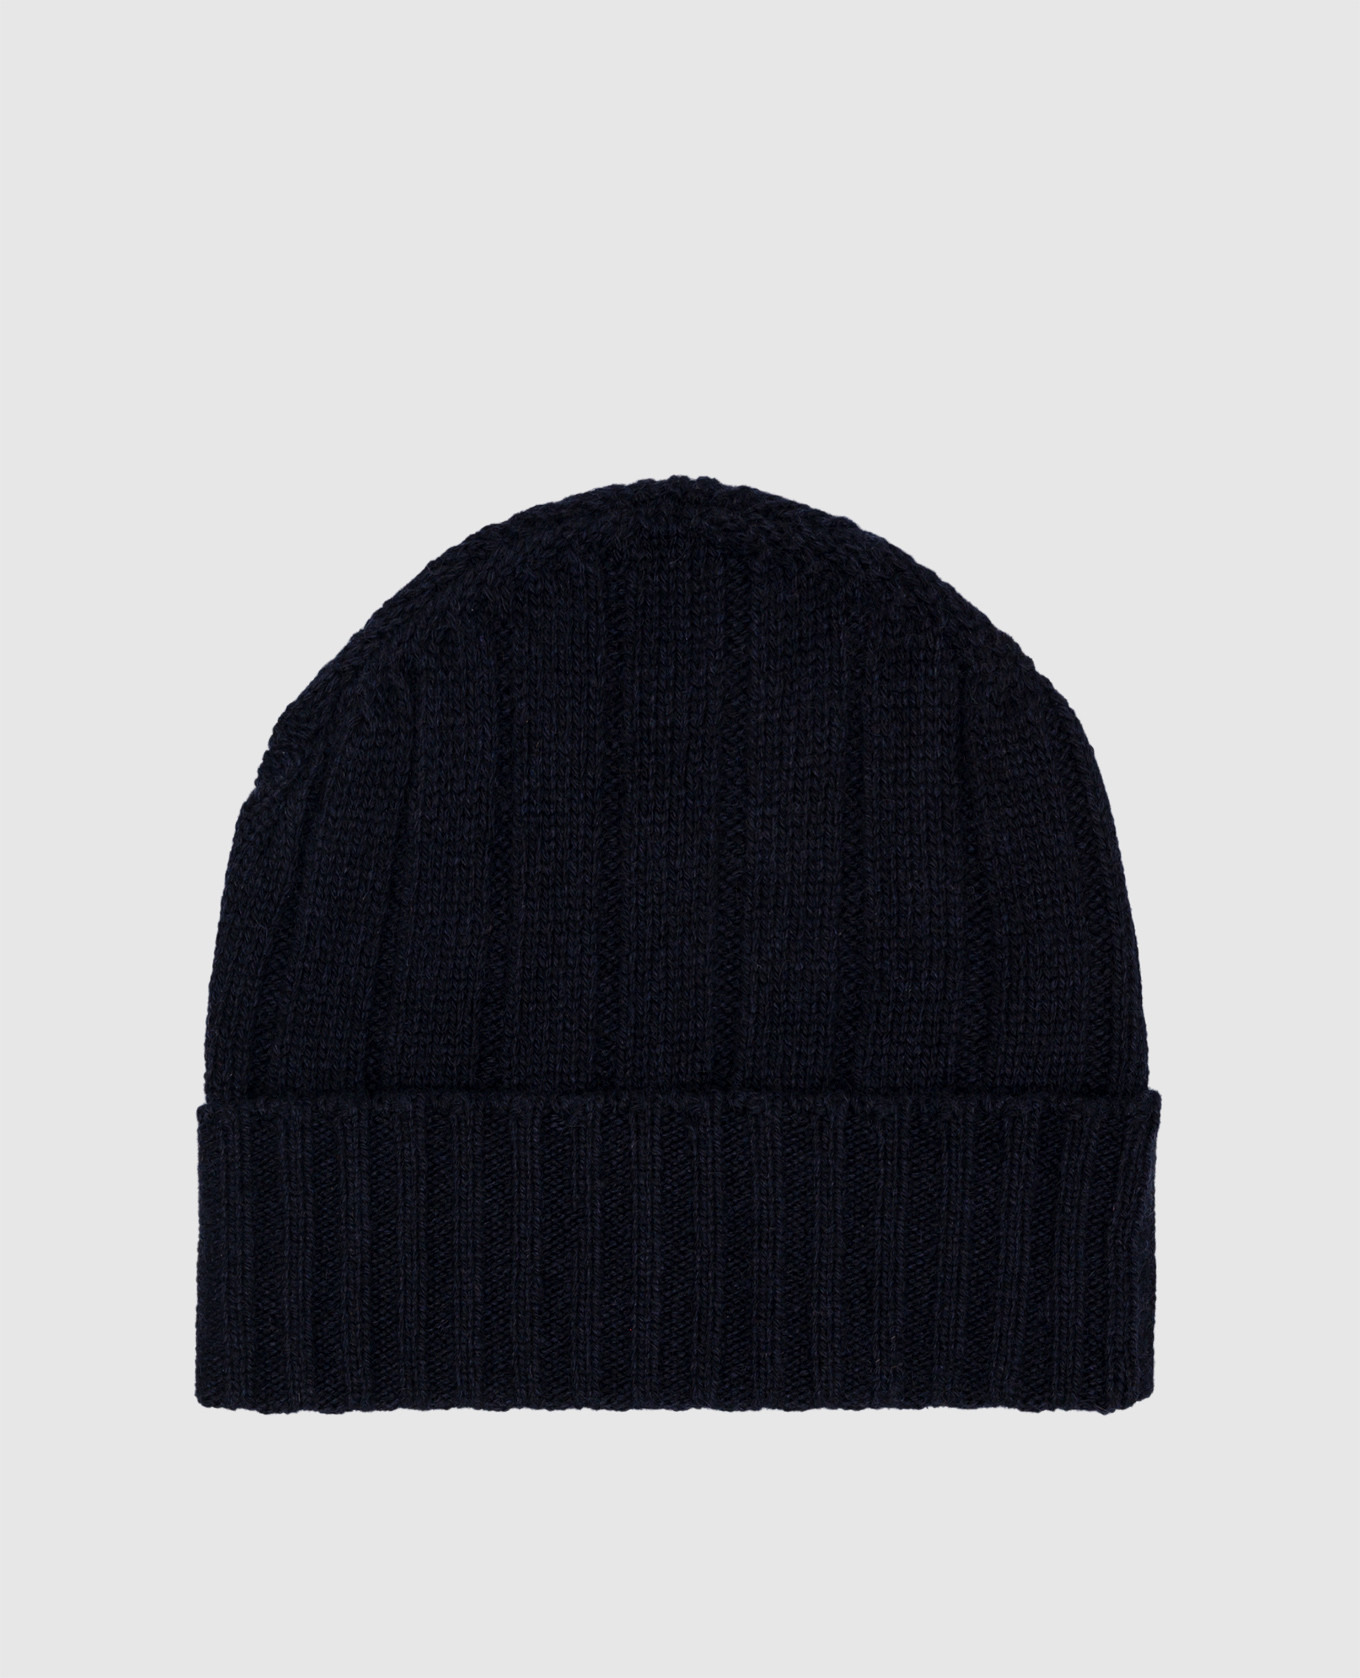 Blue cashmere hat with a scar